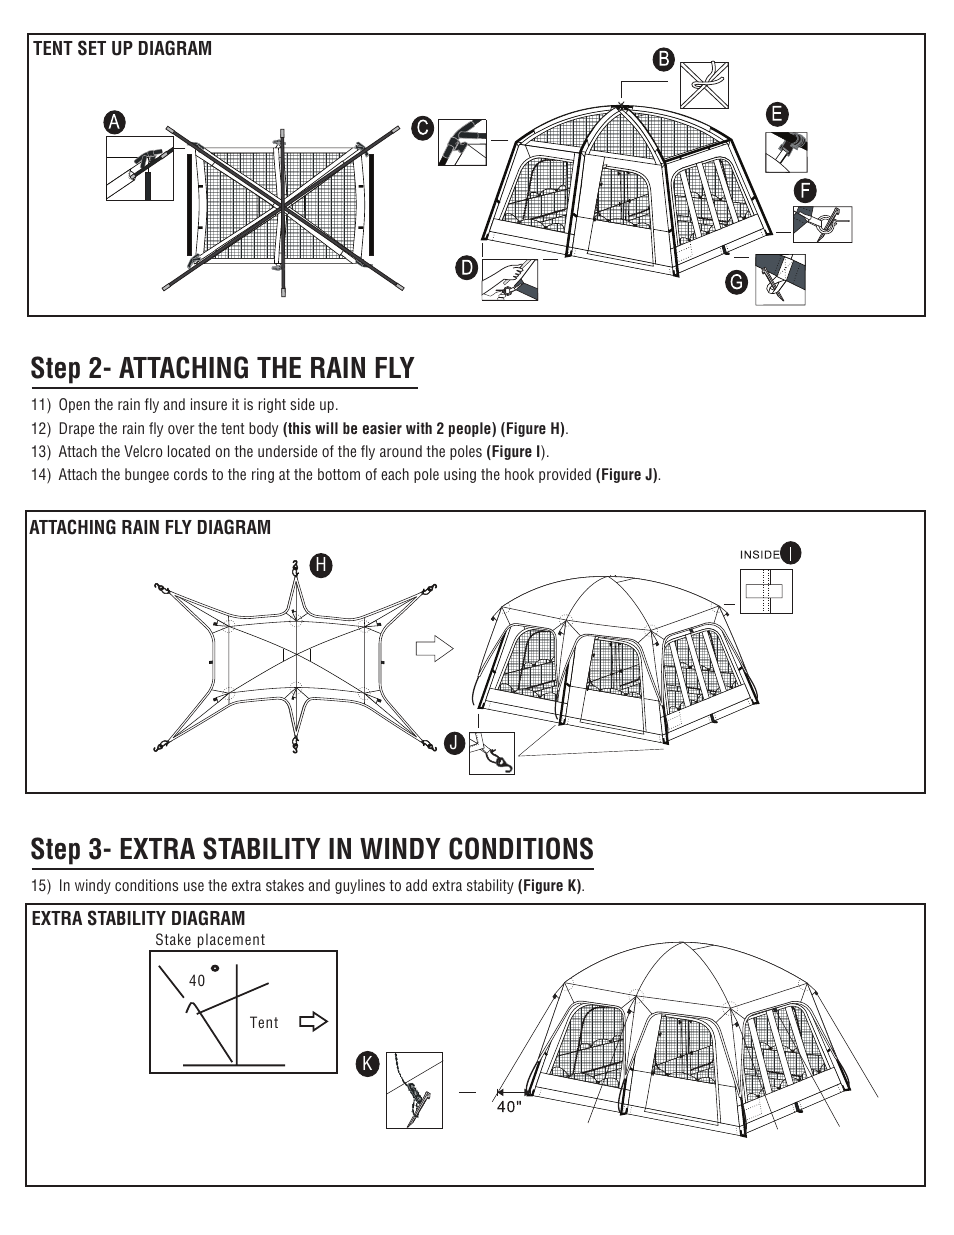 Step 2- attaching the rain fly, Step 3- extra stability in windy conditions | Giga Tent FT 018 User Manual | Page 3 / 8